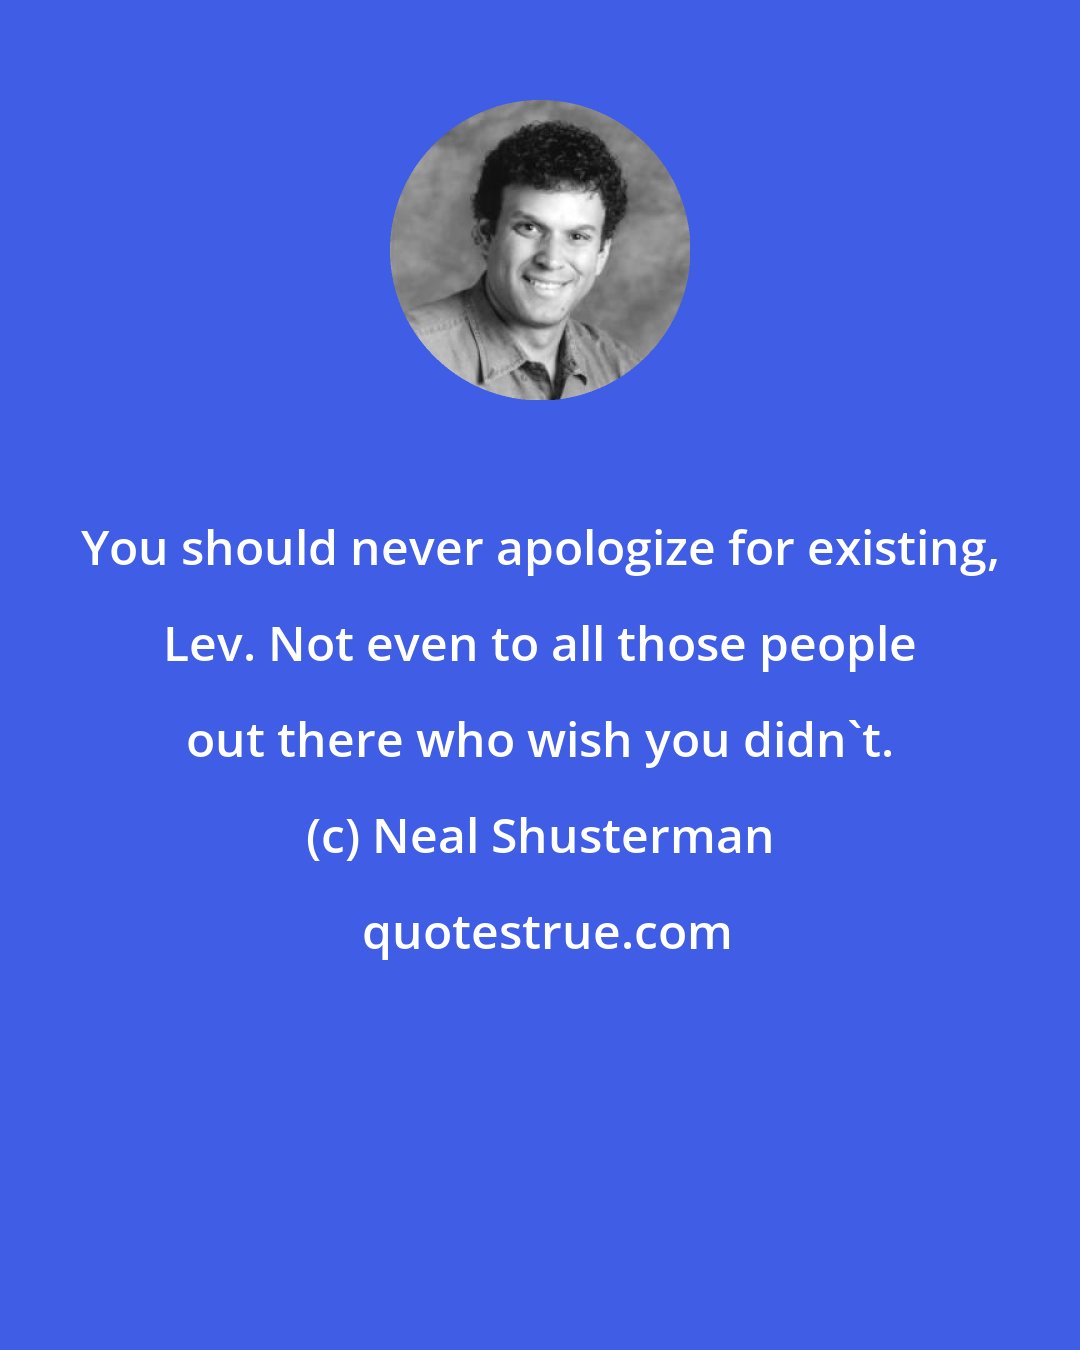 Neal Shusterman: You should never apologize for existing, Lev. Not even to all those people out there who wish you didn't.